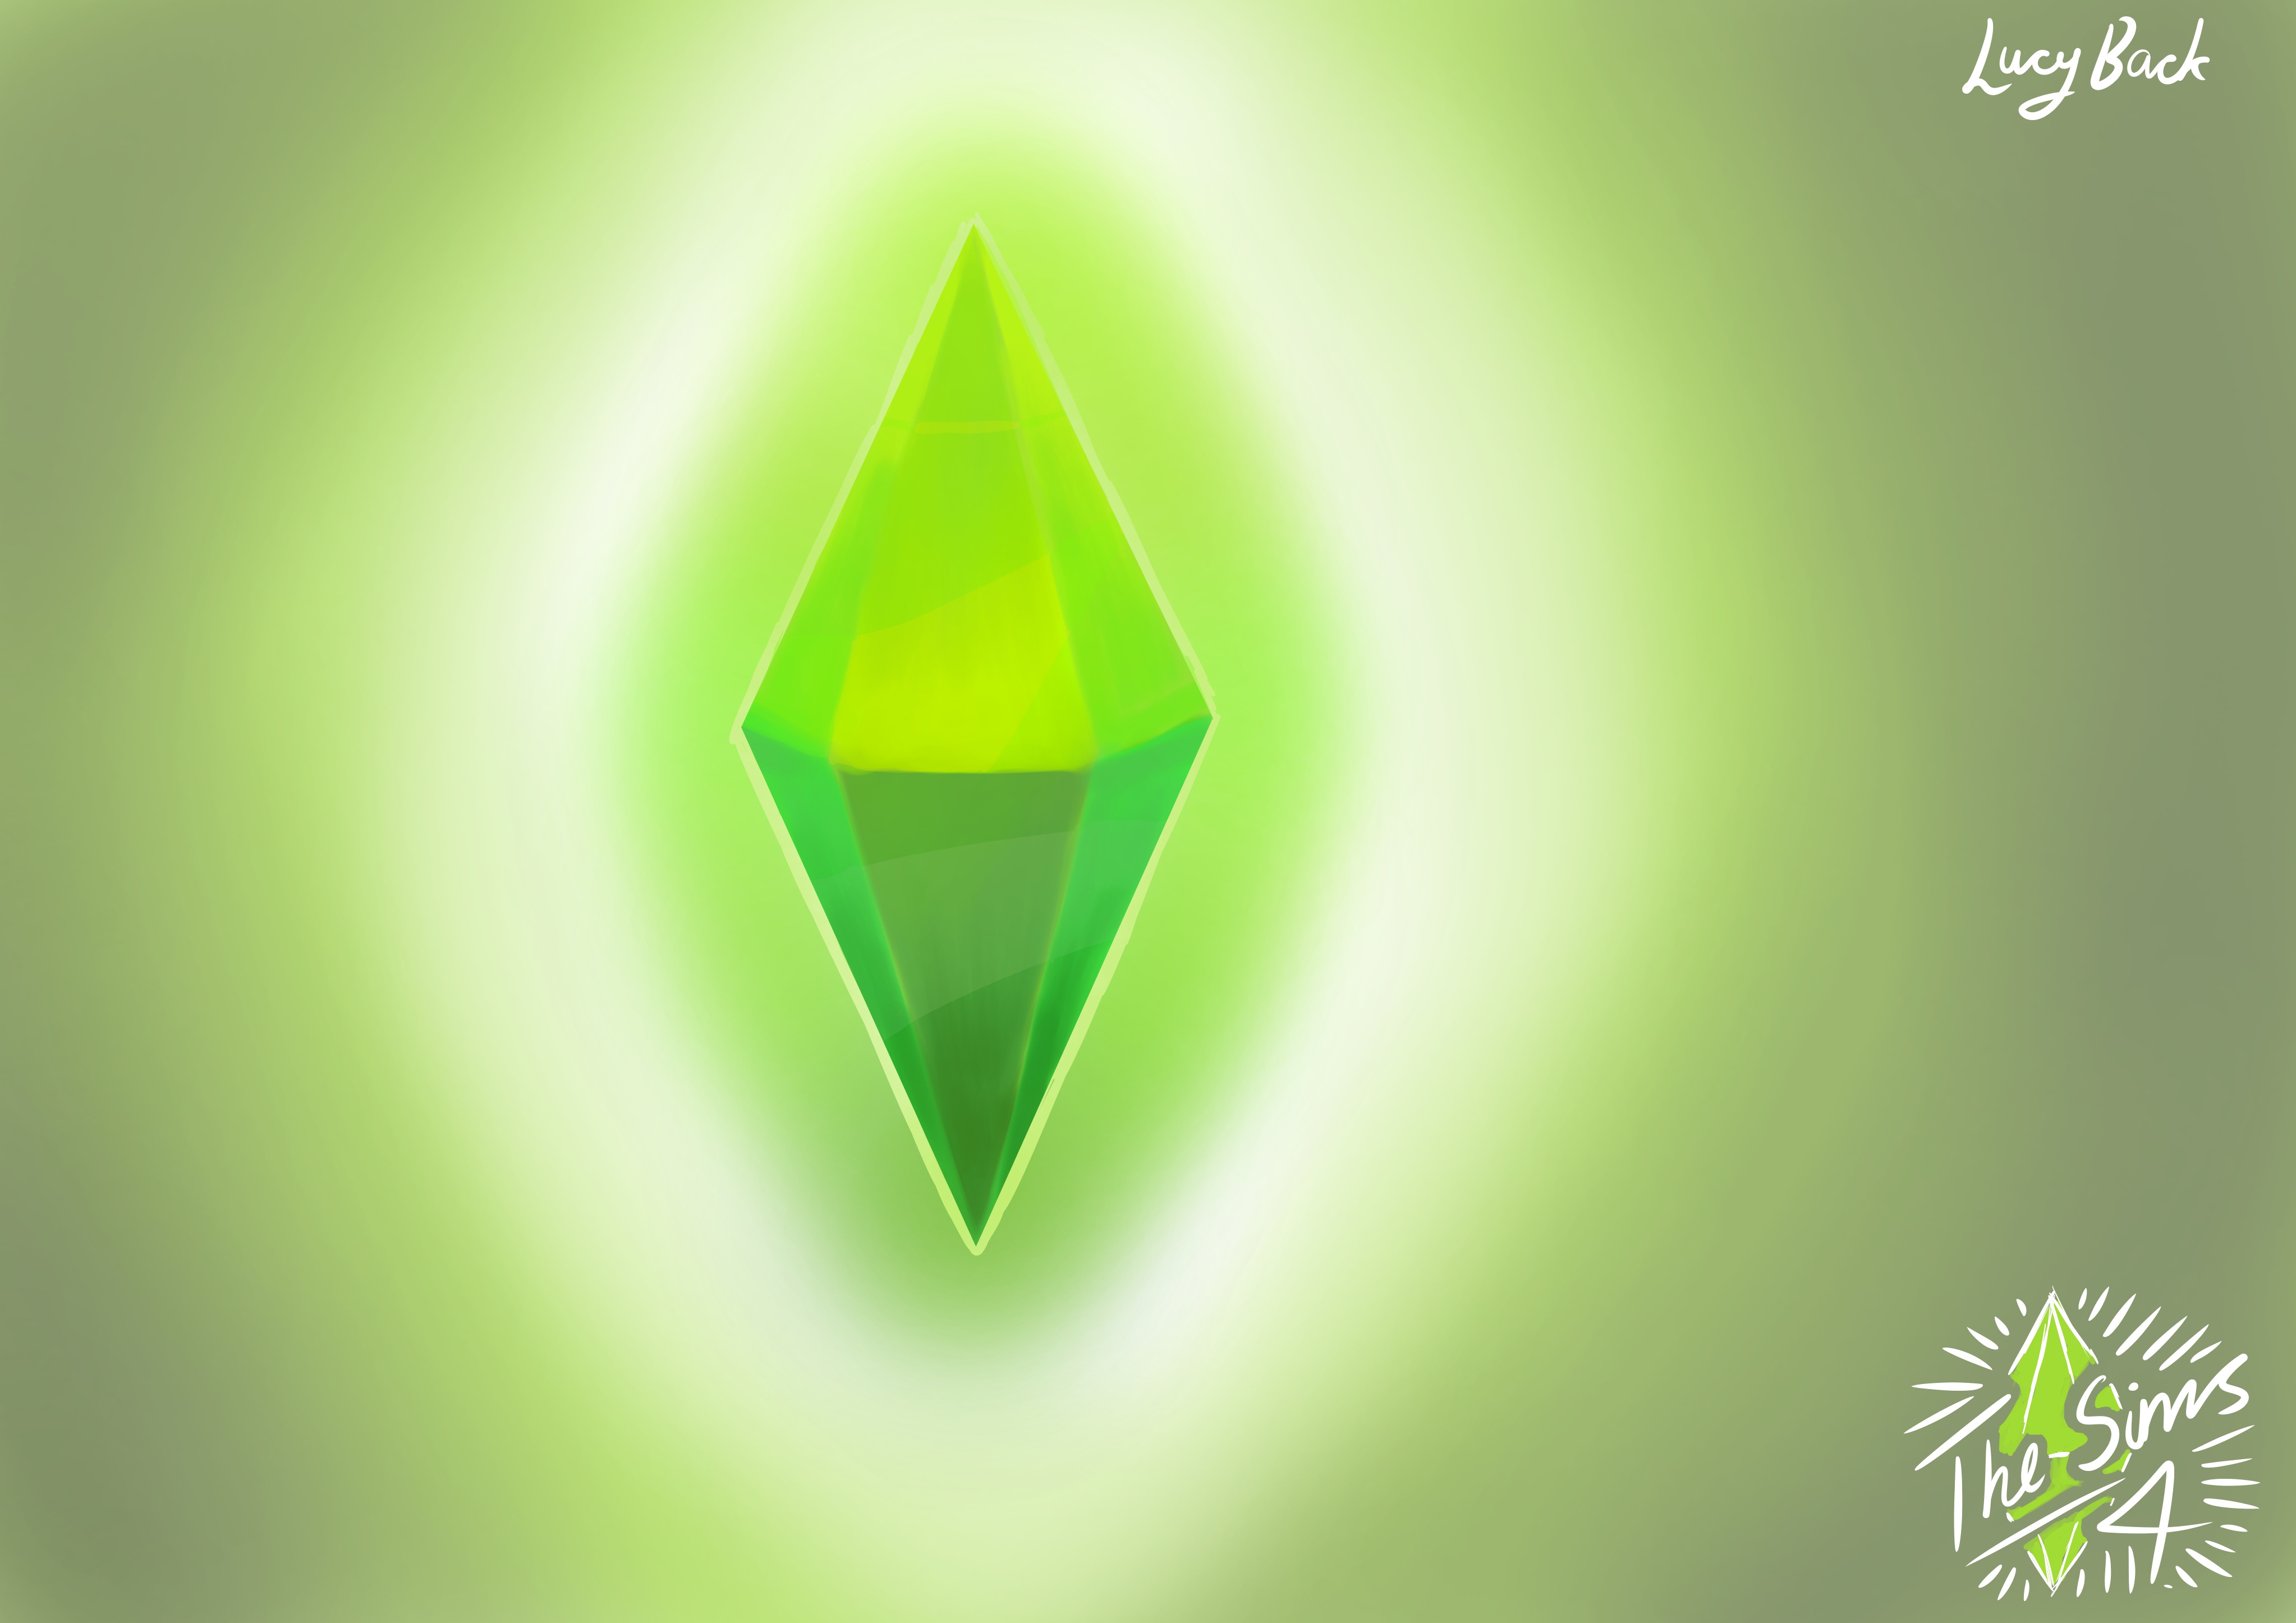 Sims 4 Logo - Know Your Meme SimplyBe